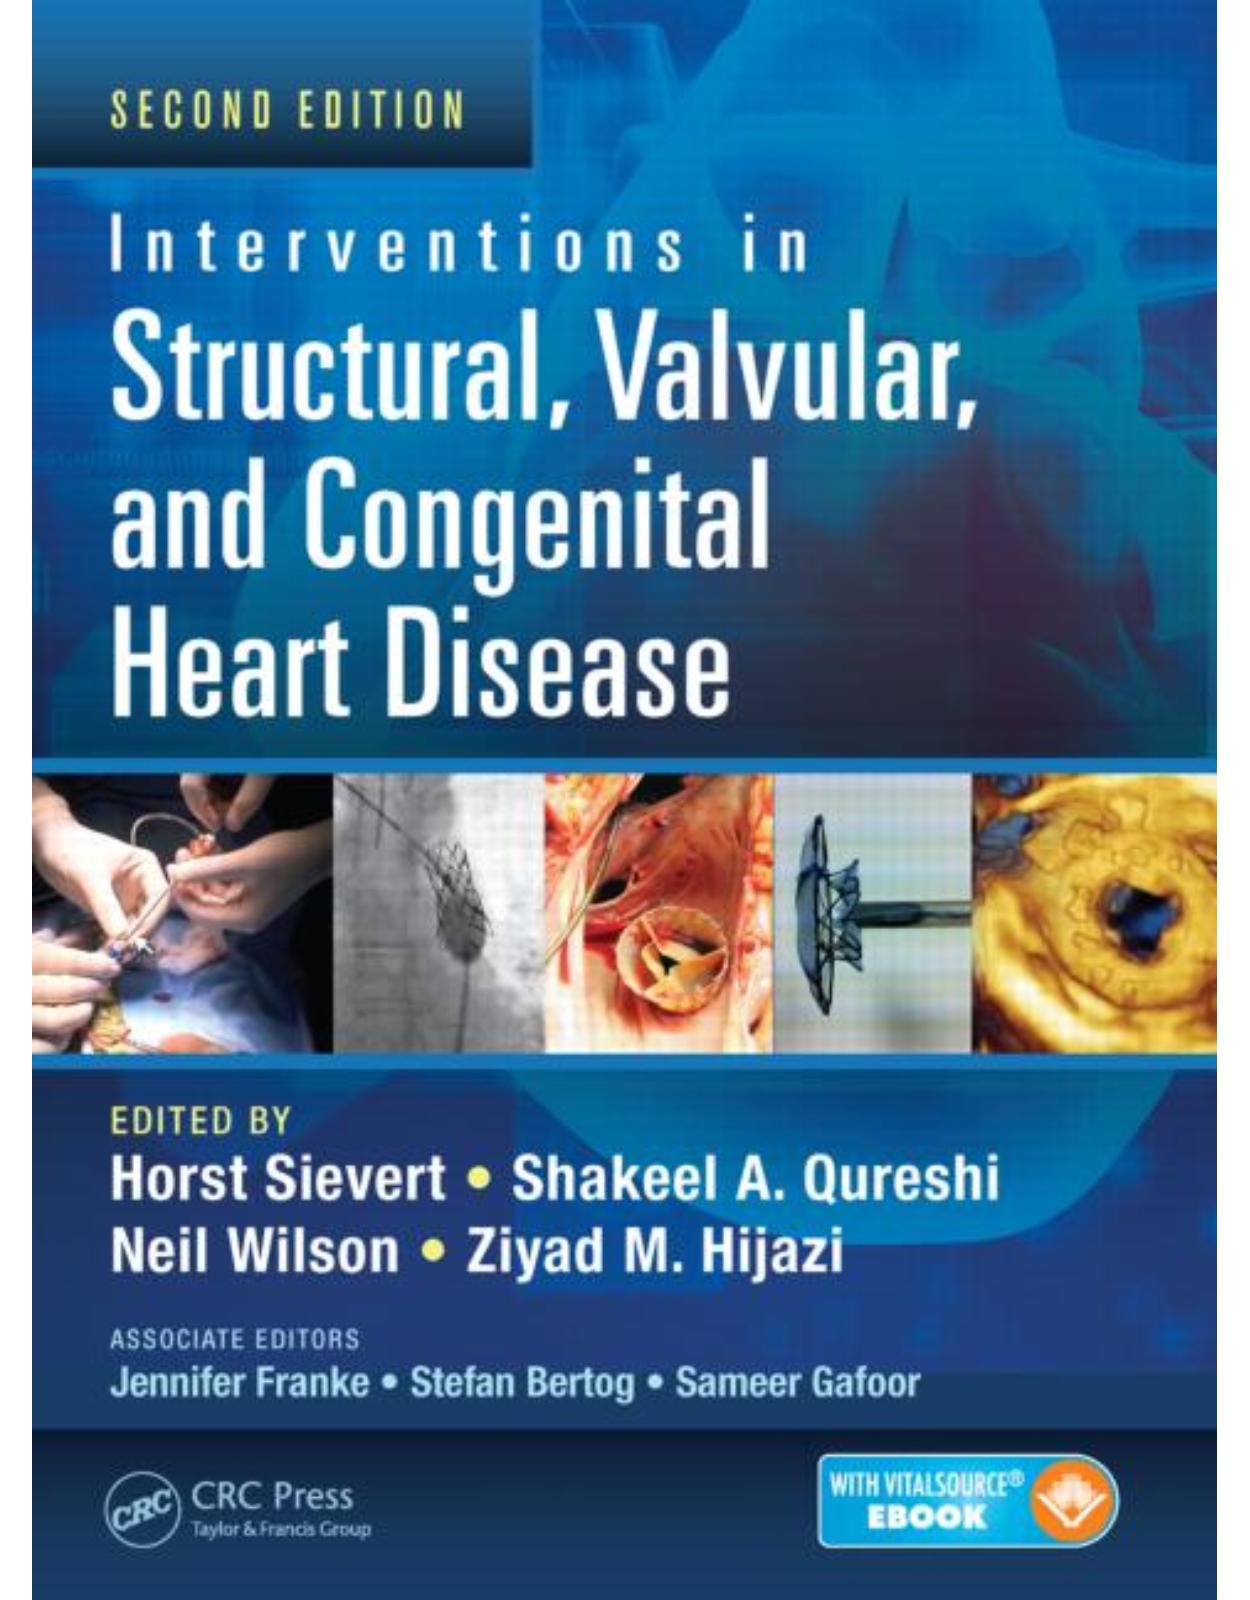 Interventions in Structural, Valvular and Congenital Heart Disease, Second Edition